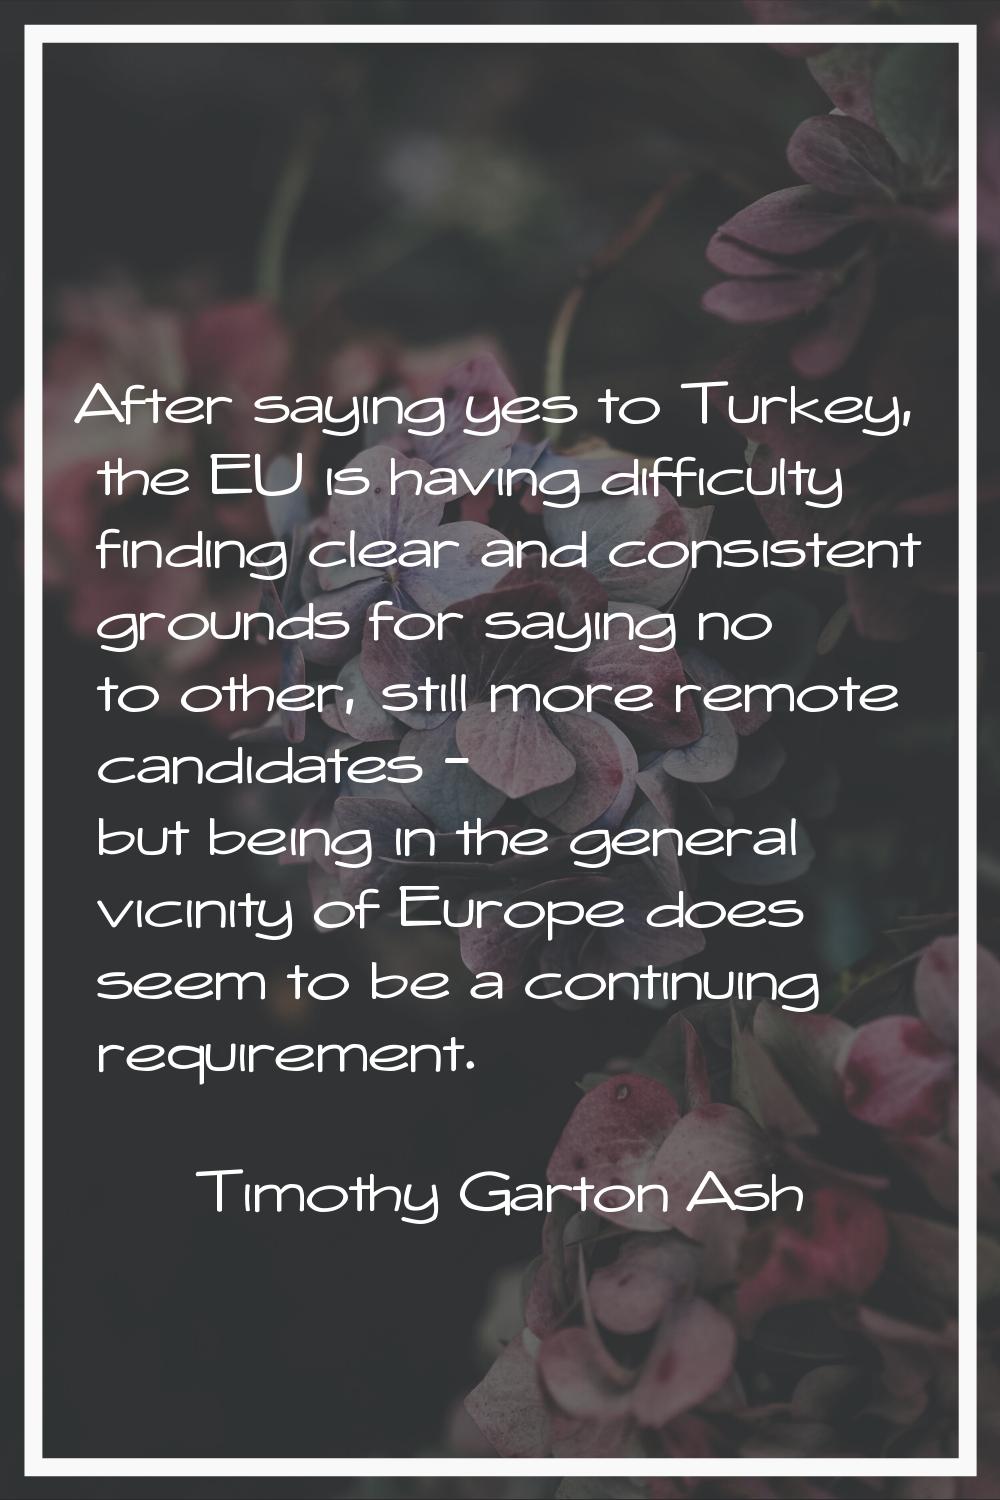 After saying yes to Turkey, the EU is having difficulty finding clear and consistent grounds for sa